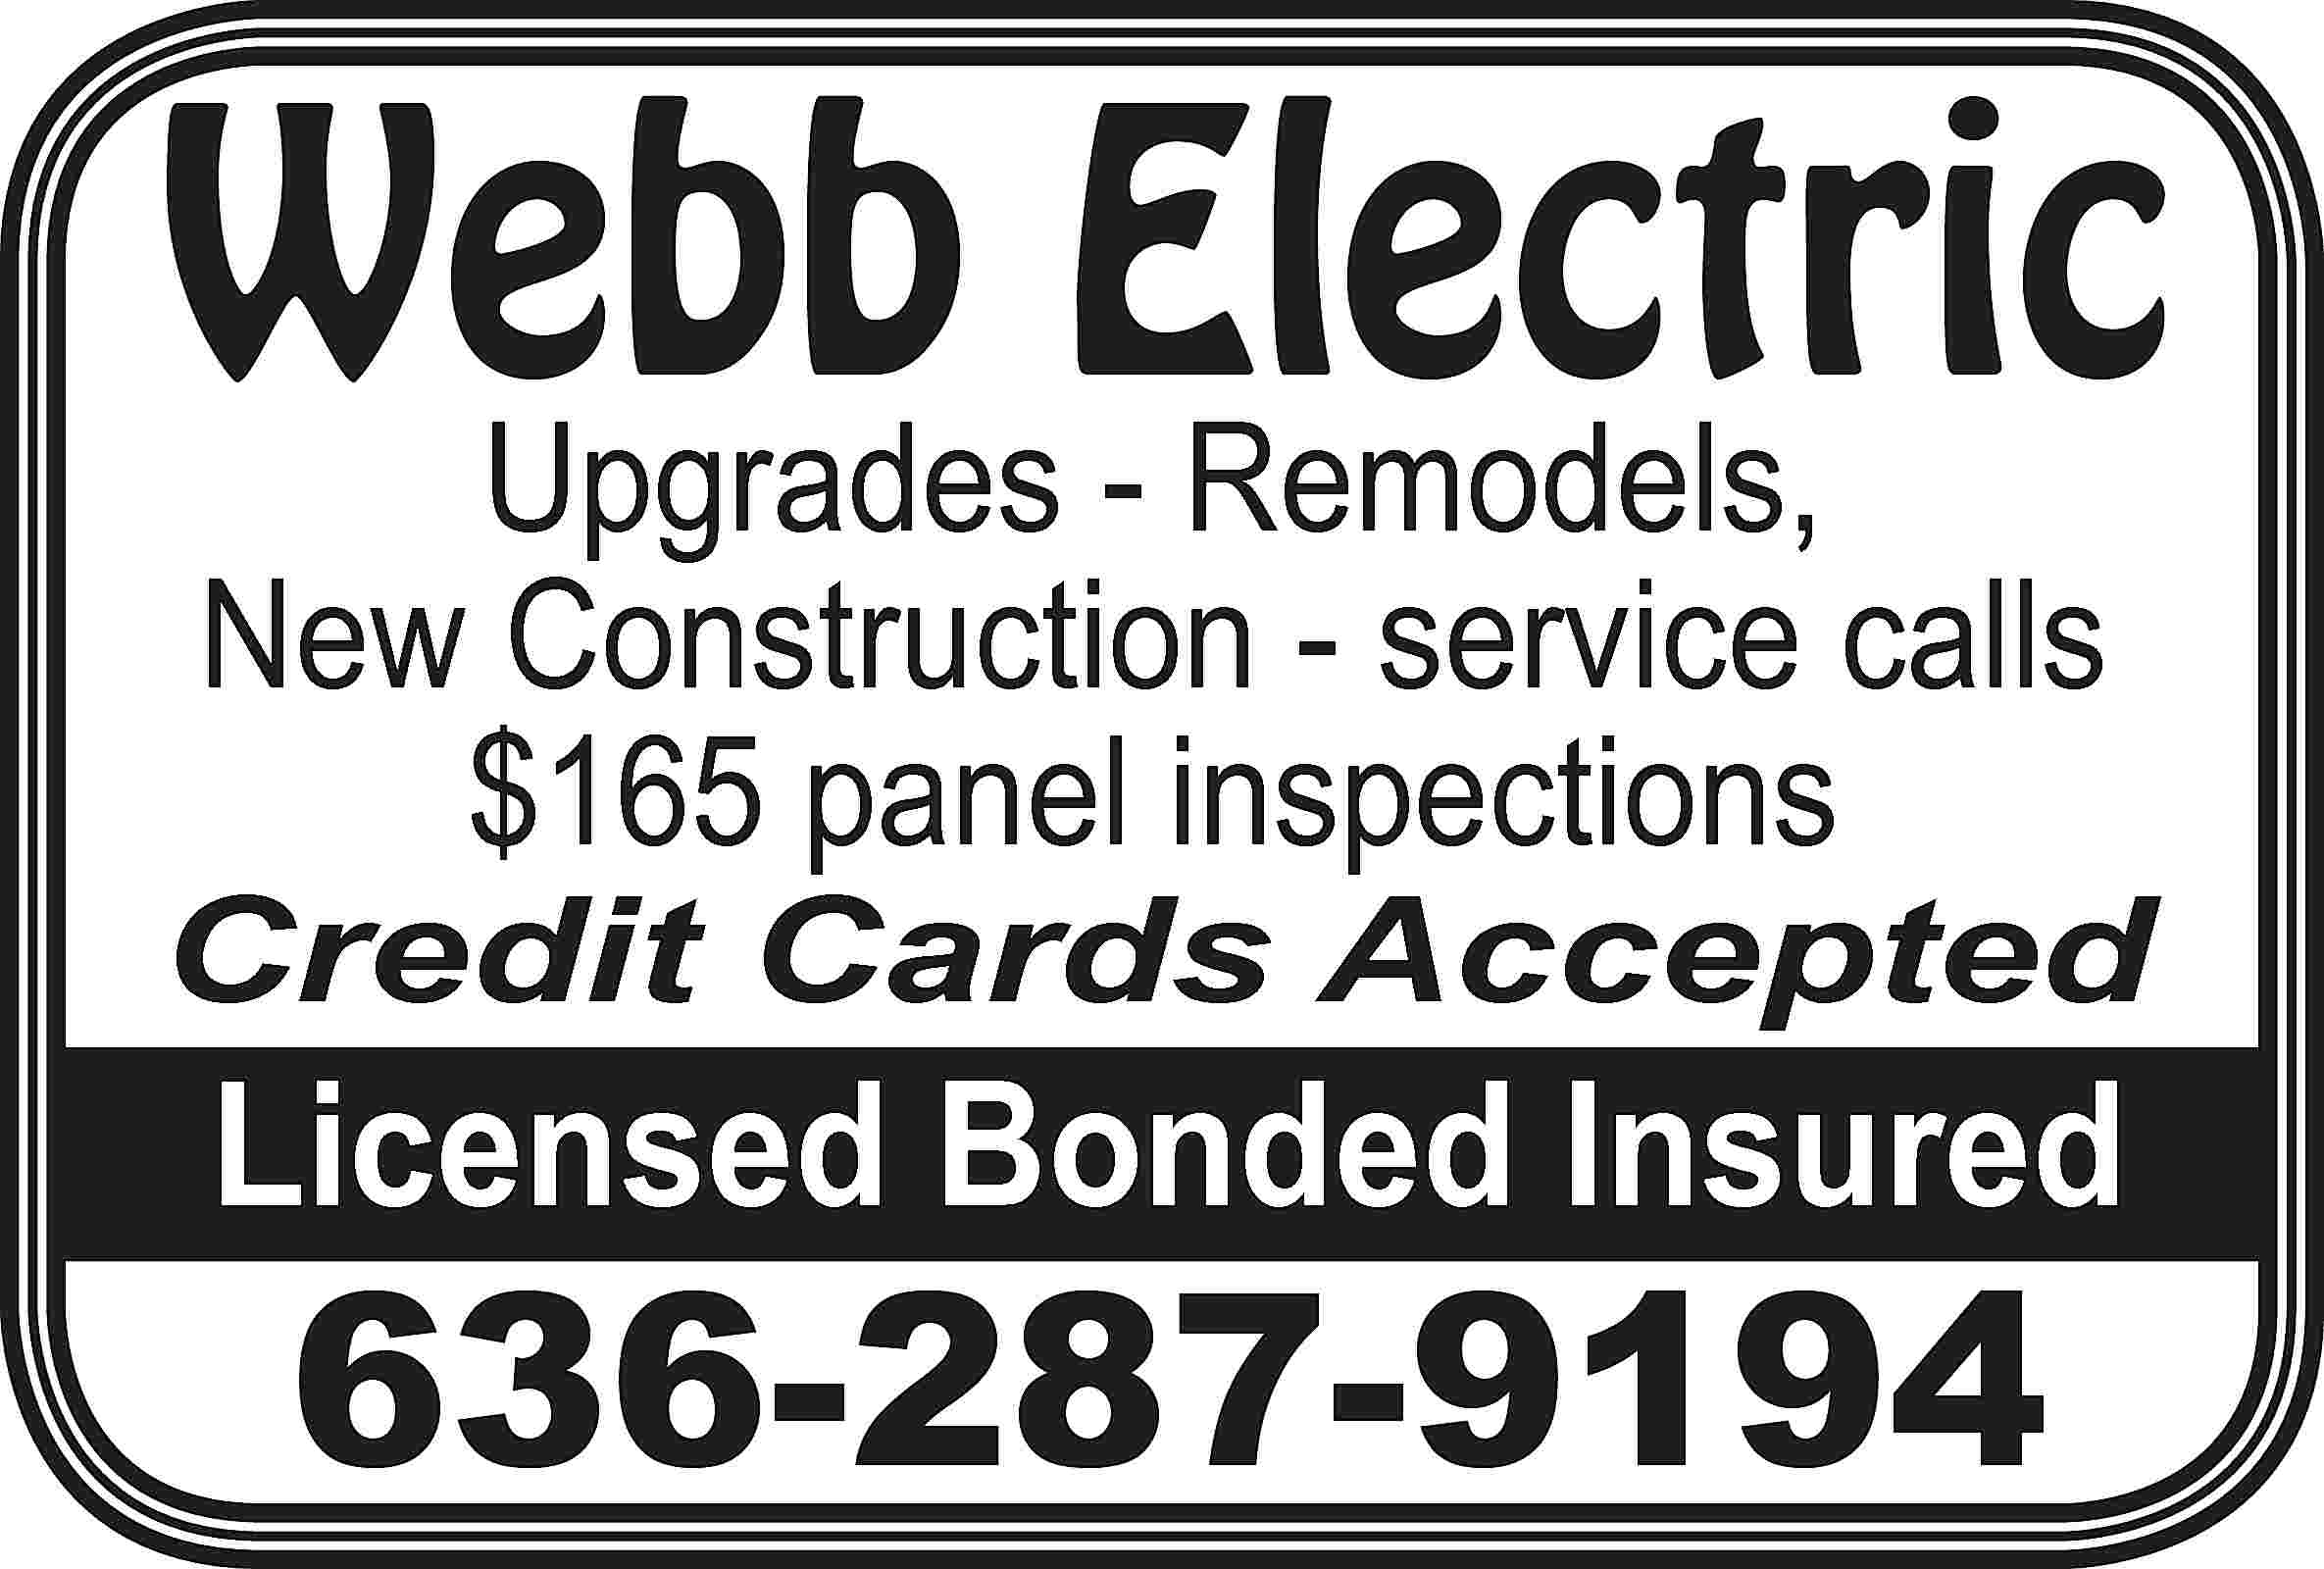 Webb Electric Upgrades - Remodels,  Webb Electric Upgrades - Remodels, New Construction - service calls $165 panel inspections Credit Cards Accepted Licensed Bonded Insured 636-287-9194